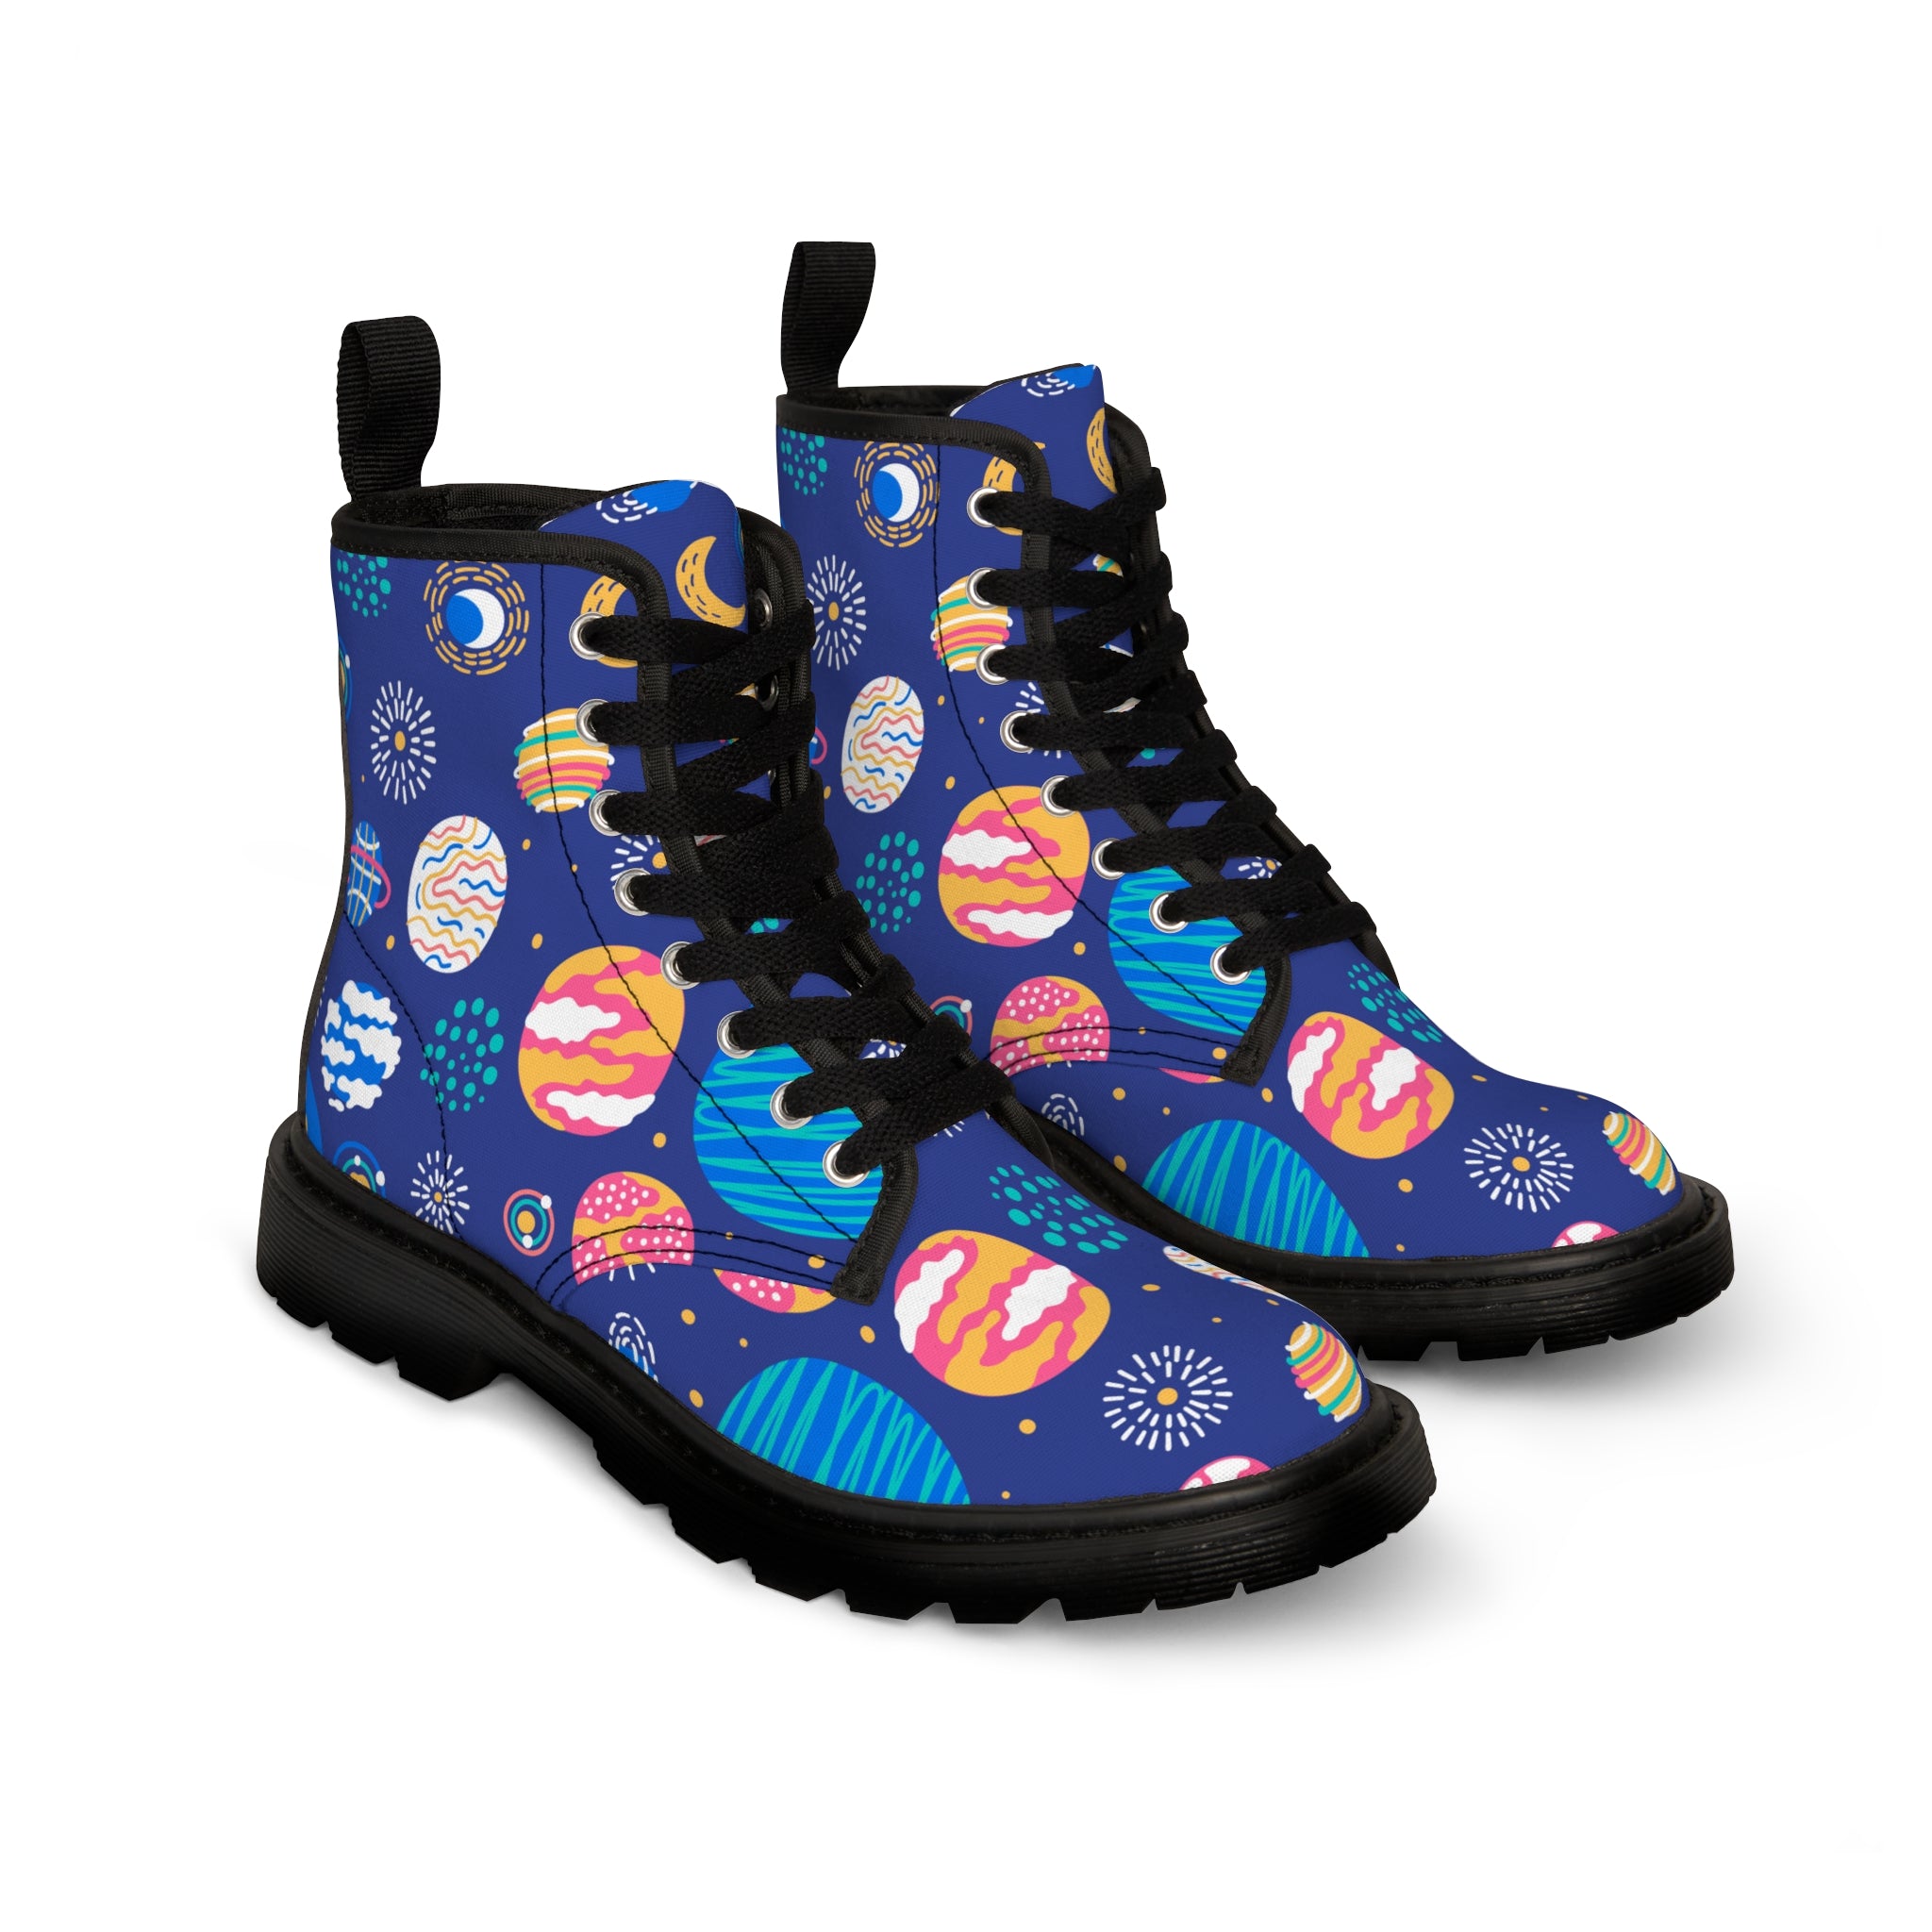 Custom Designer Canvas Lace up Boots for Women with Planet Prints in Black for a Space Enthusiast